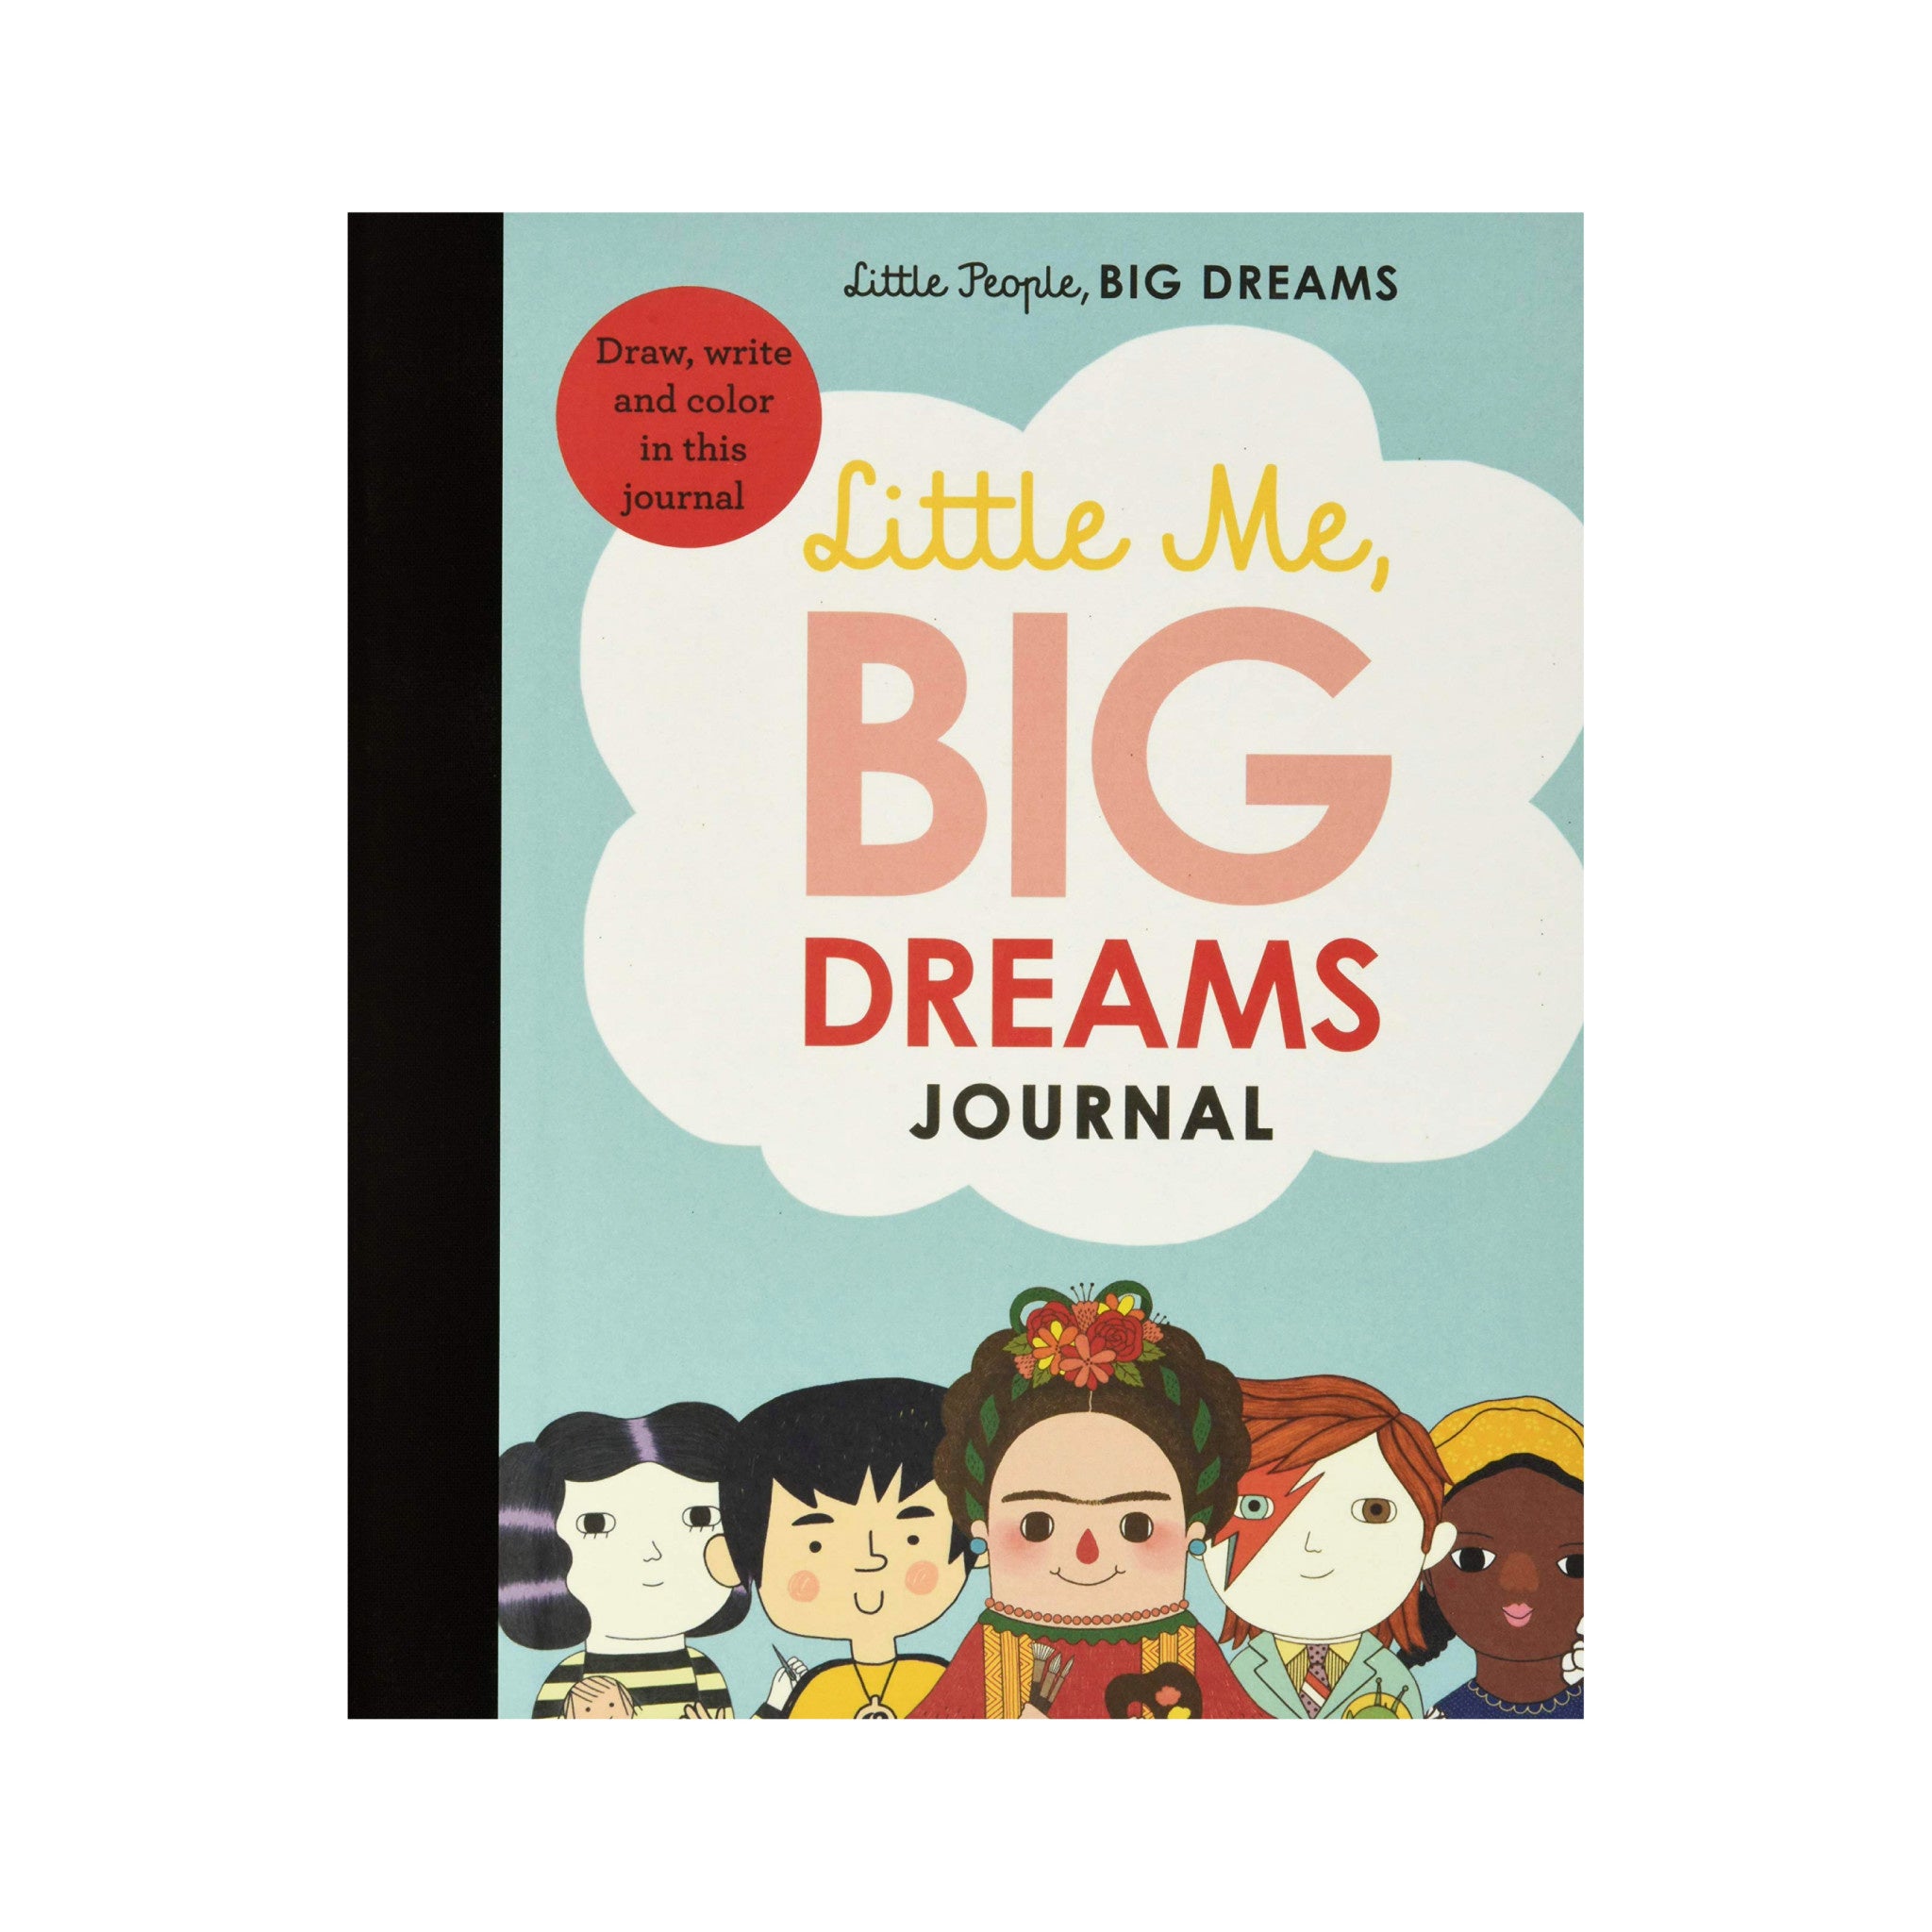 Little Me, Big Dreams Journal: Draw, Write and Color This Journal - Wynwood Walls Shop